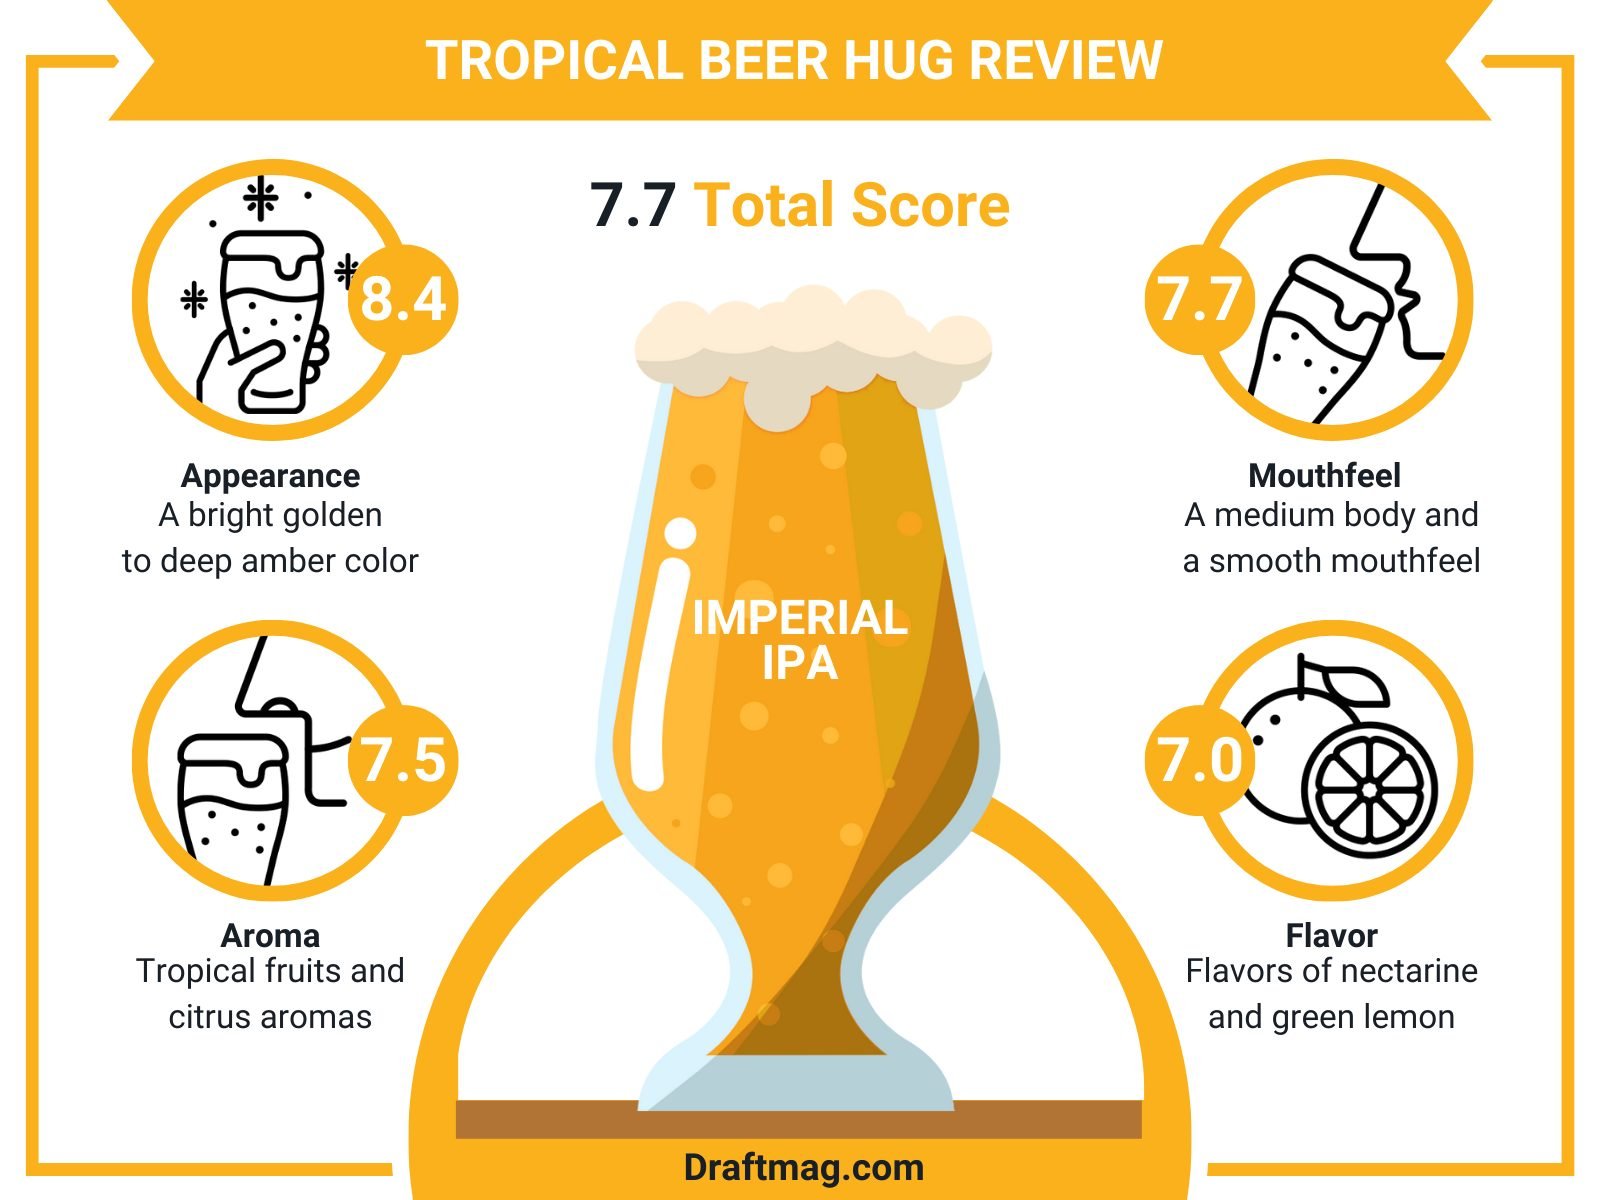 Tropical Beer Hug Review Infographic